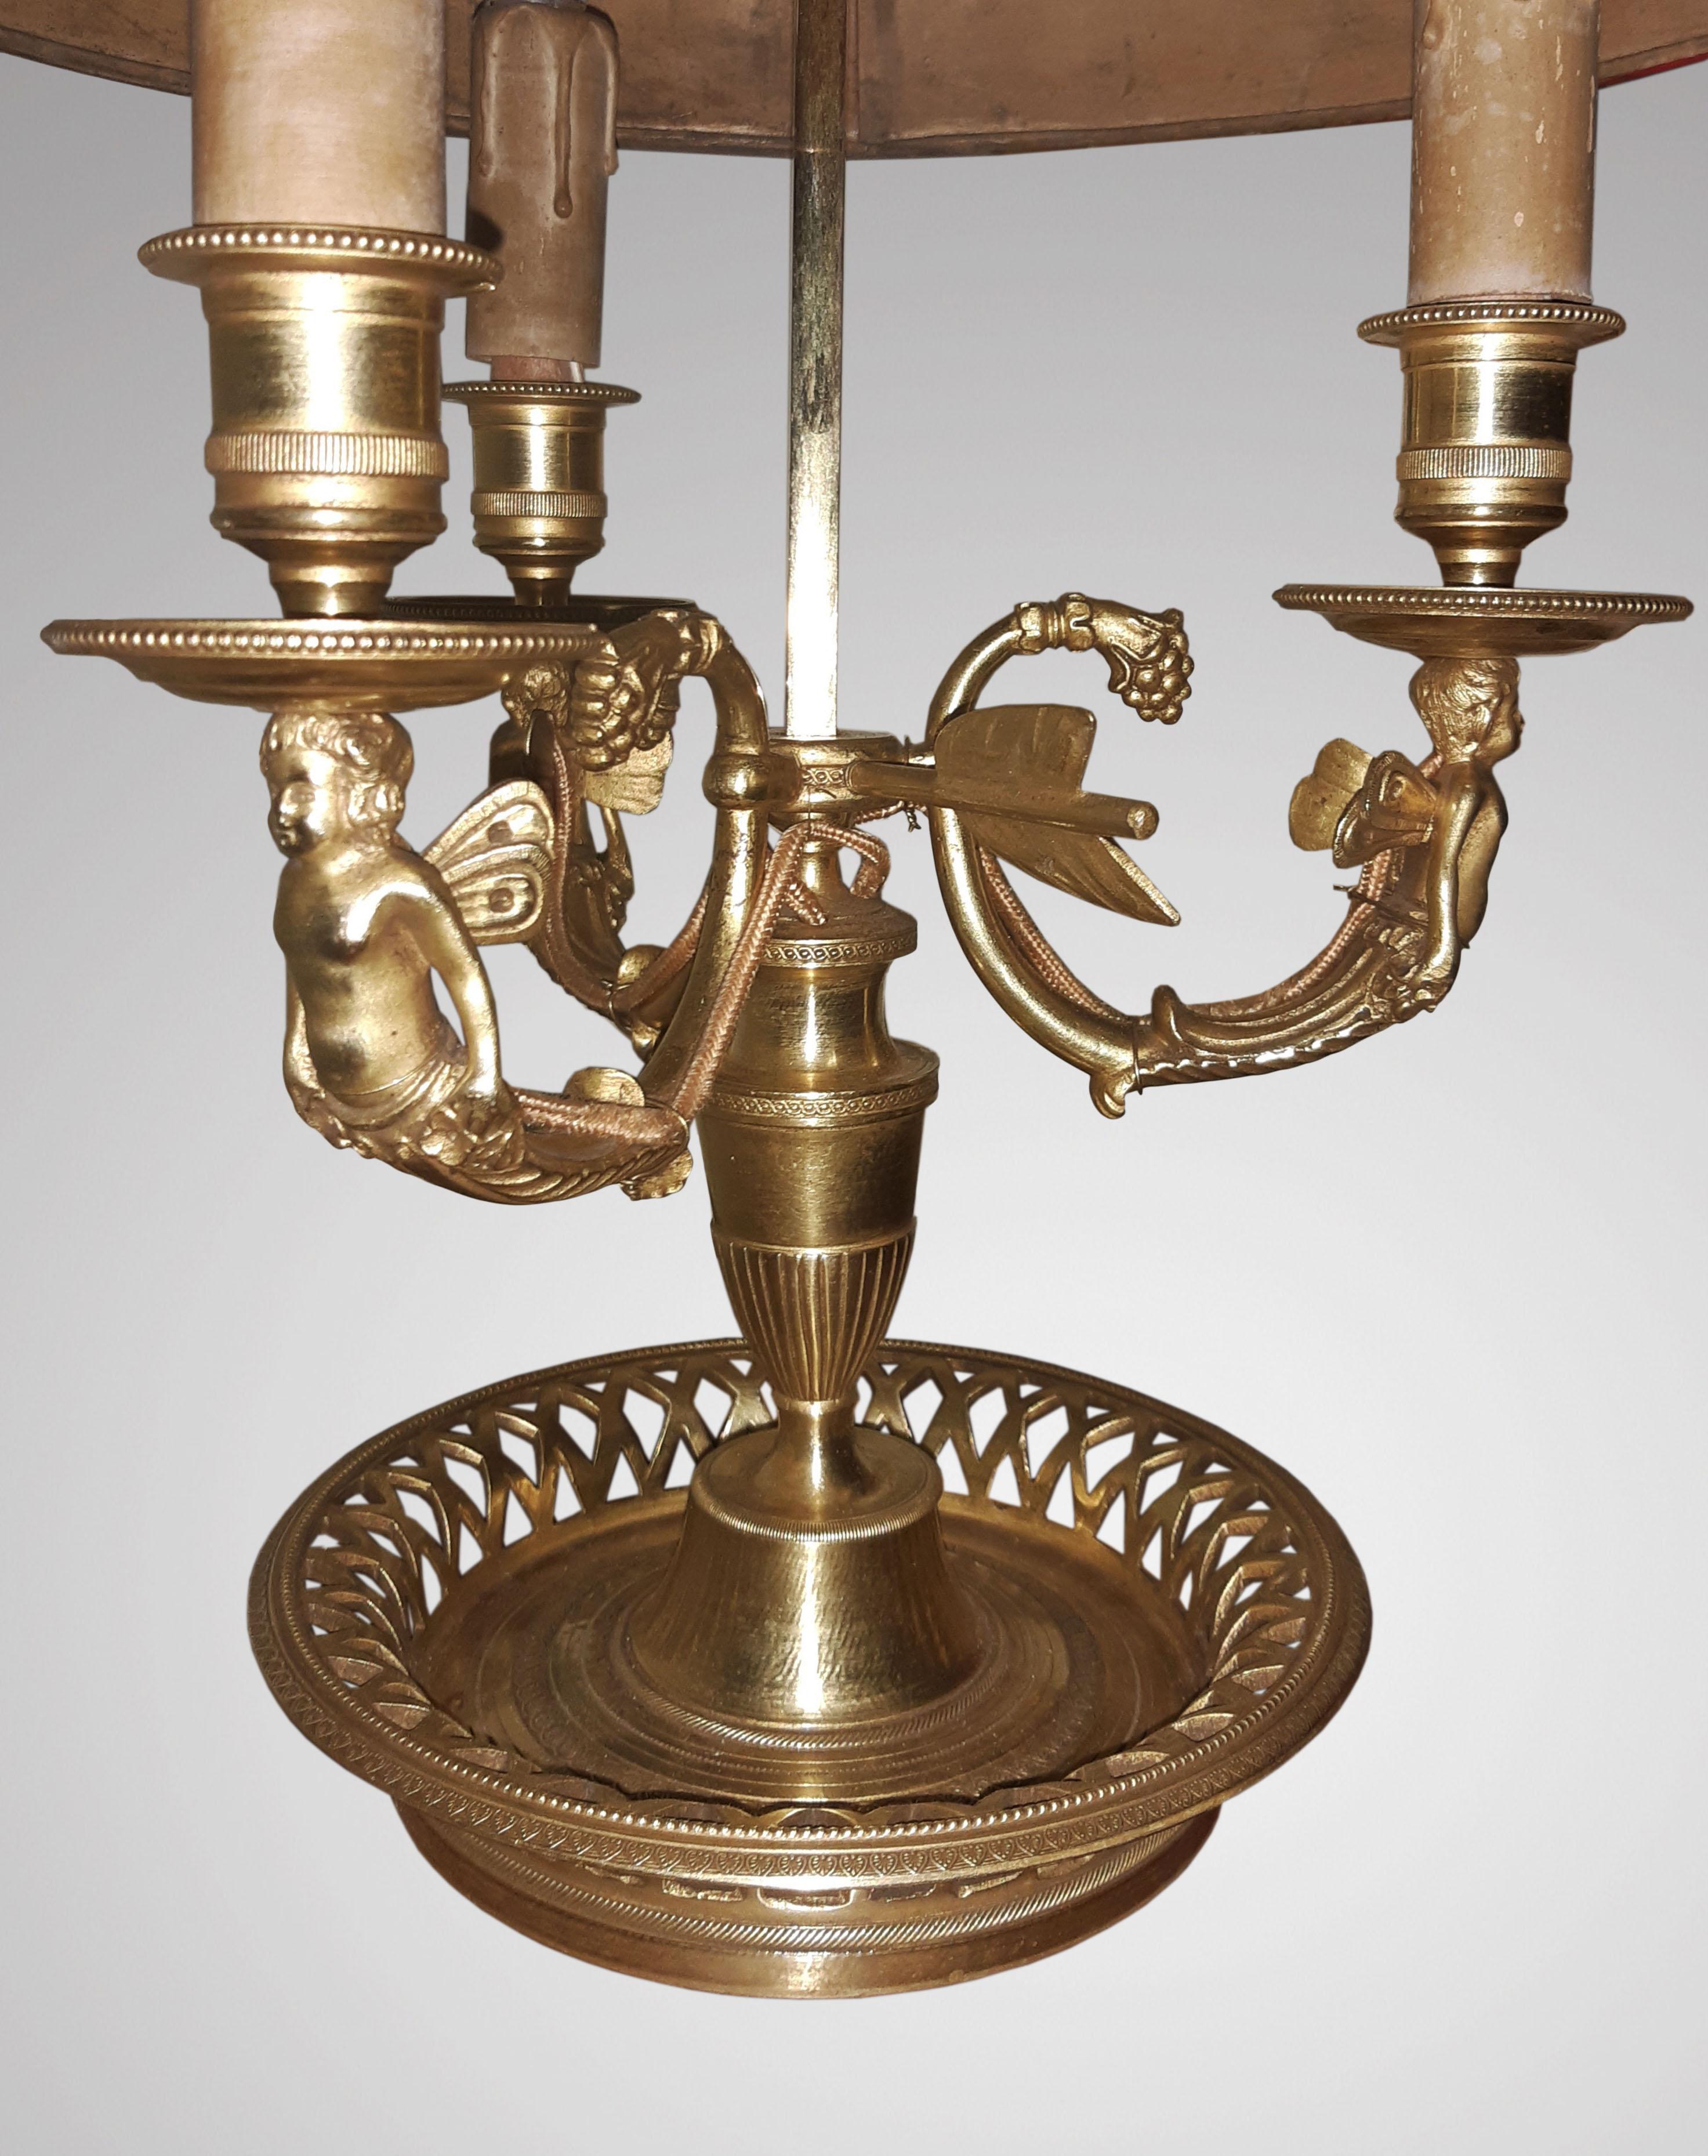 Elegant bouillotte lamp in Louis XVI style, XIXth century, with a gilded bronze structure with three arms of light decorated with dragonflies connected to a barrel resting on a base forming an openwork basket.
The metal shade painted with a pretty